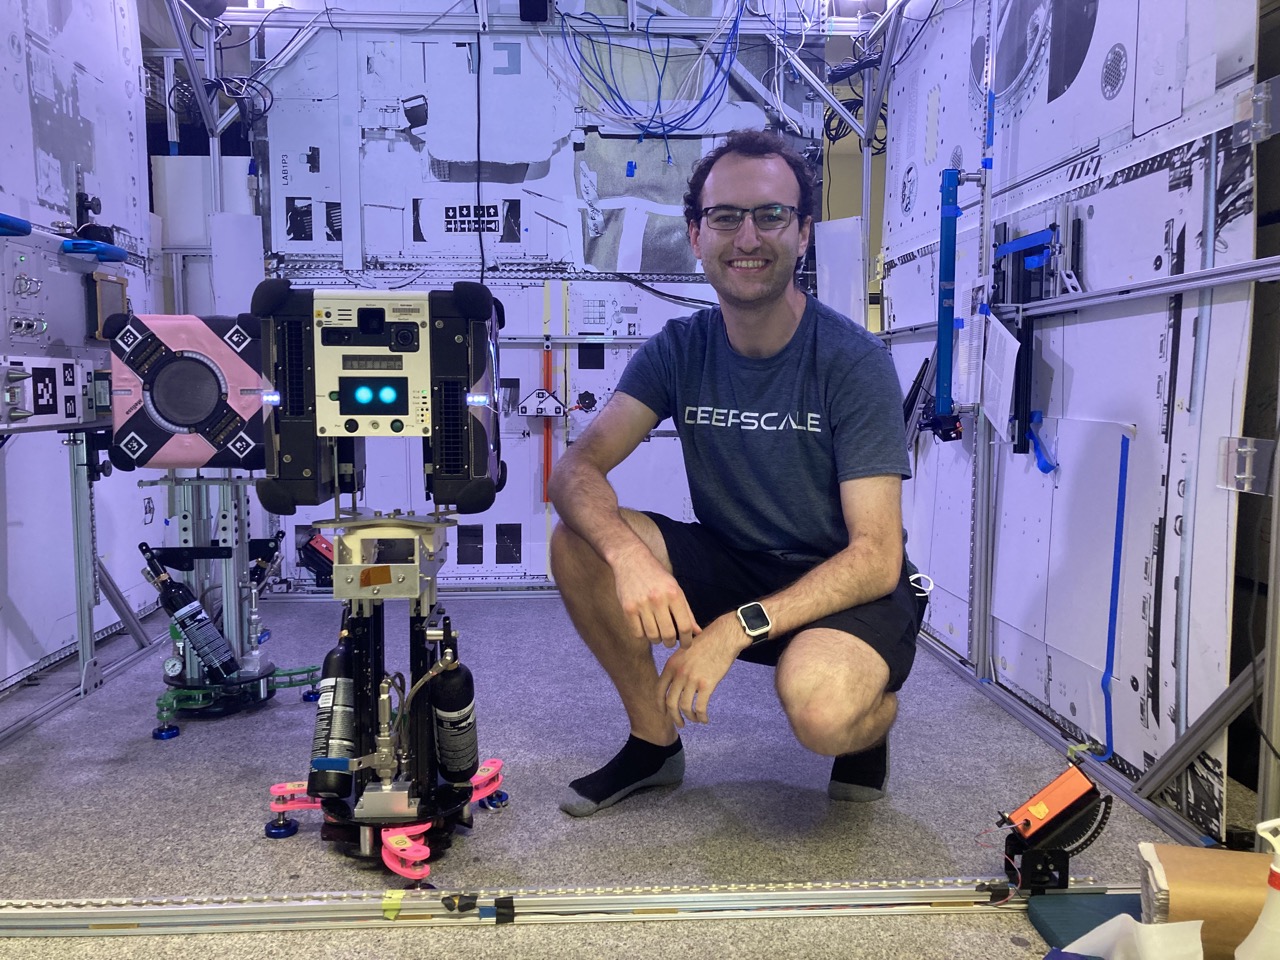 Picture of me kneeling near one of the cube-shaped astrobee robots in the testing lab. The robot is mouted on a floatation platform.